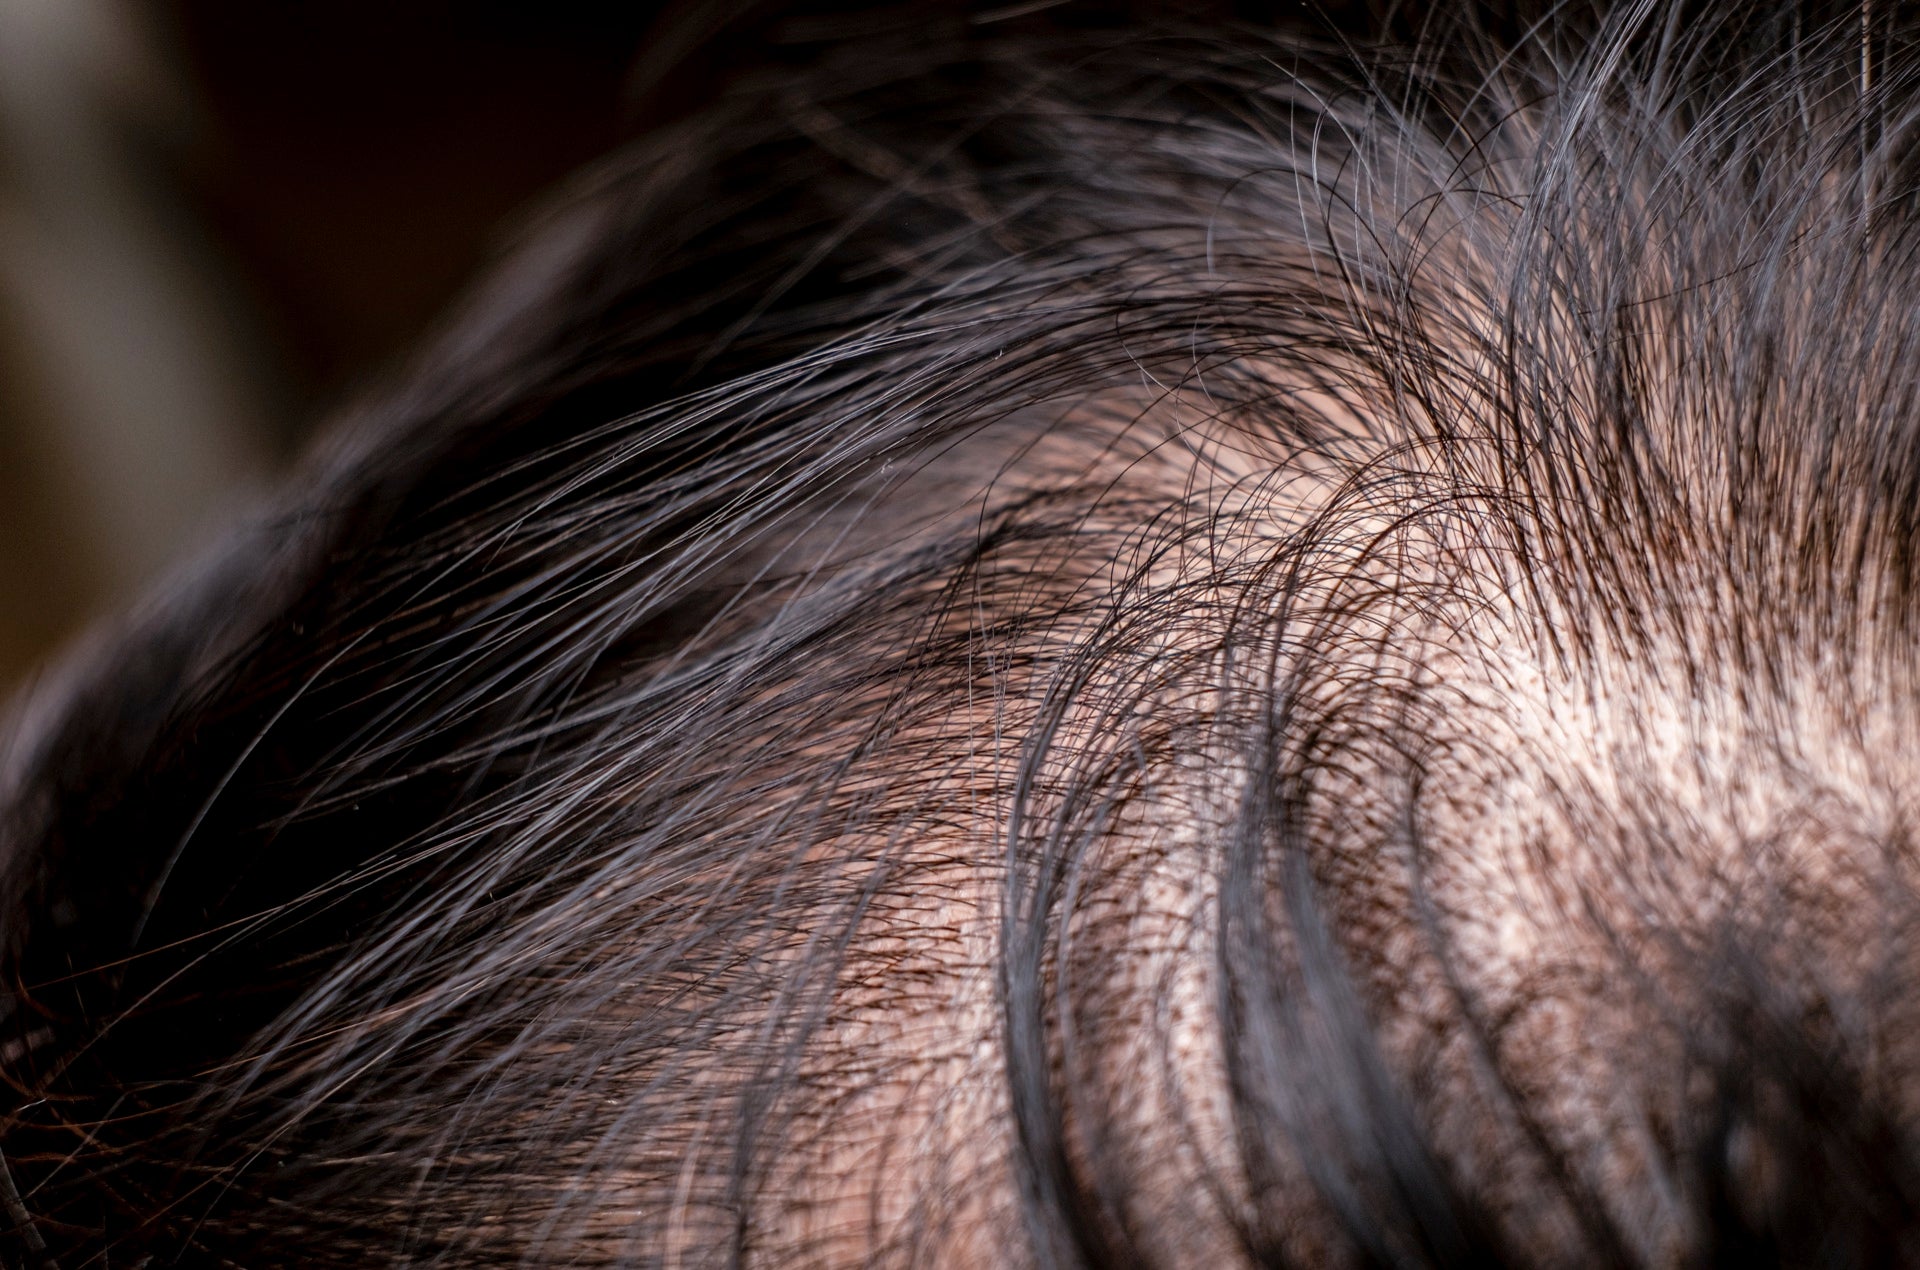 Macro shot of thin hair displaying its intricate patterns and the sheen added by hair styling products.